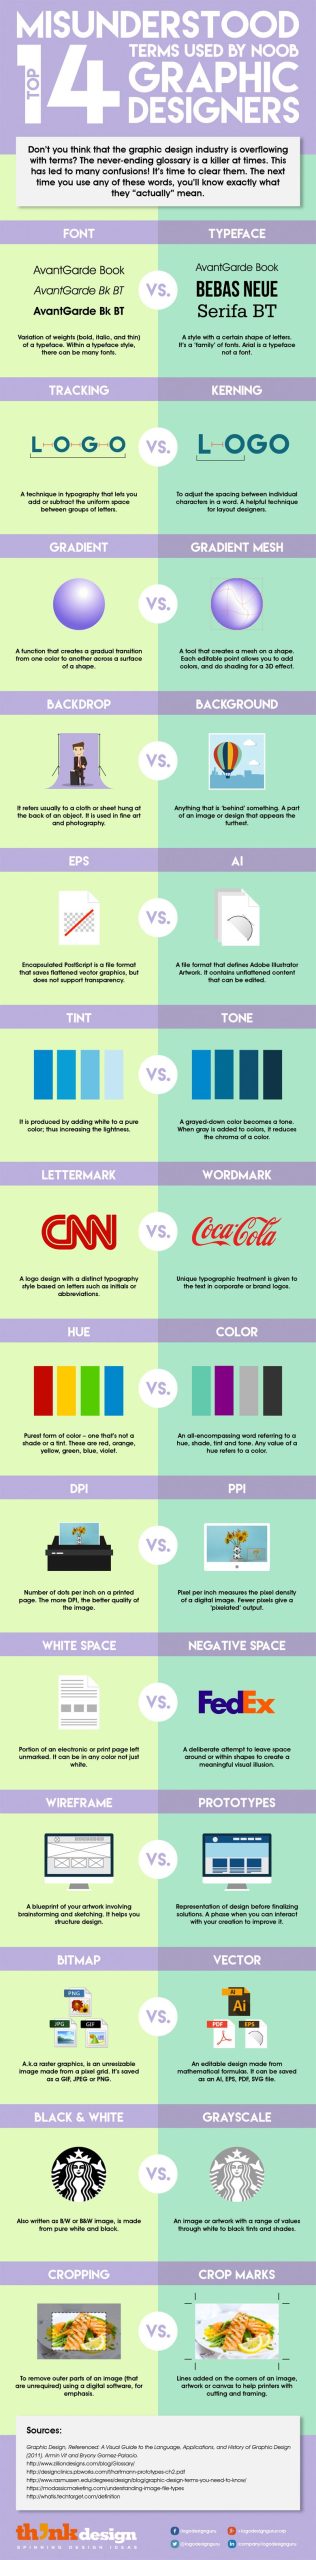 14 Graphic Design Terms That Most Designers Get Wrong